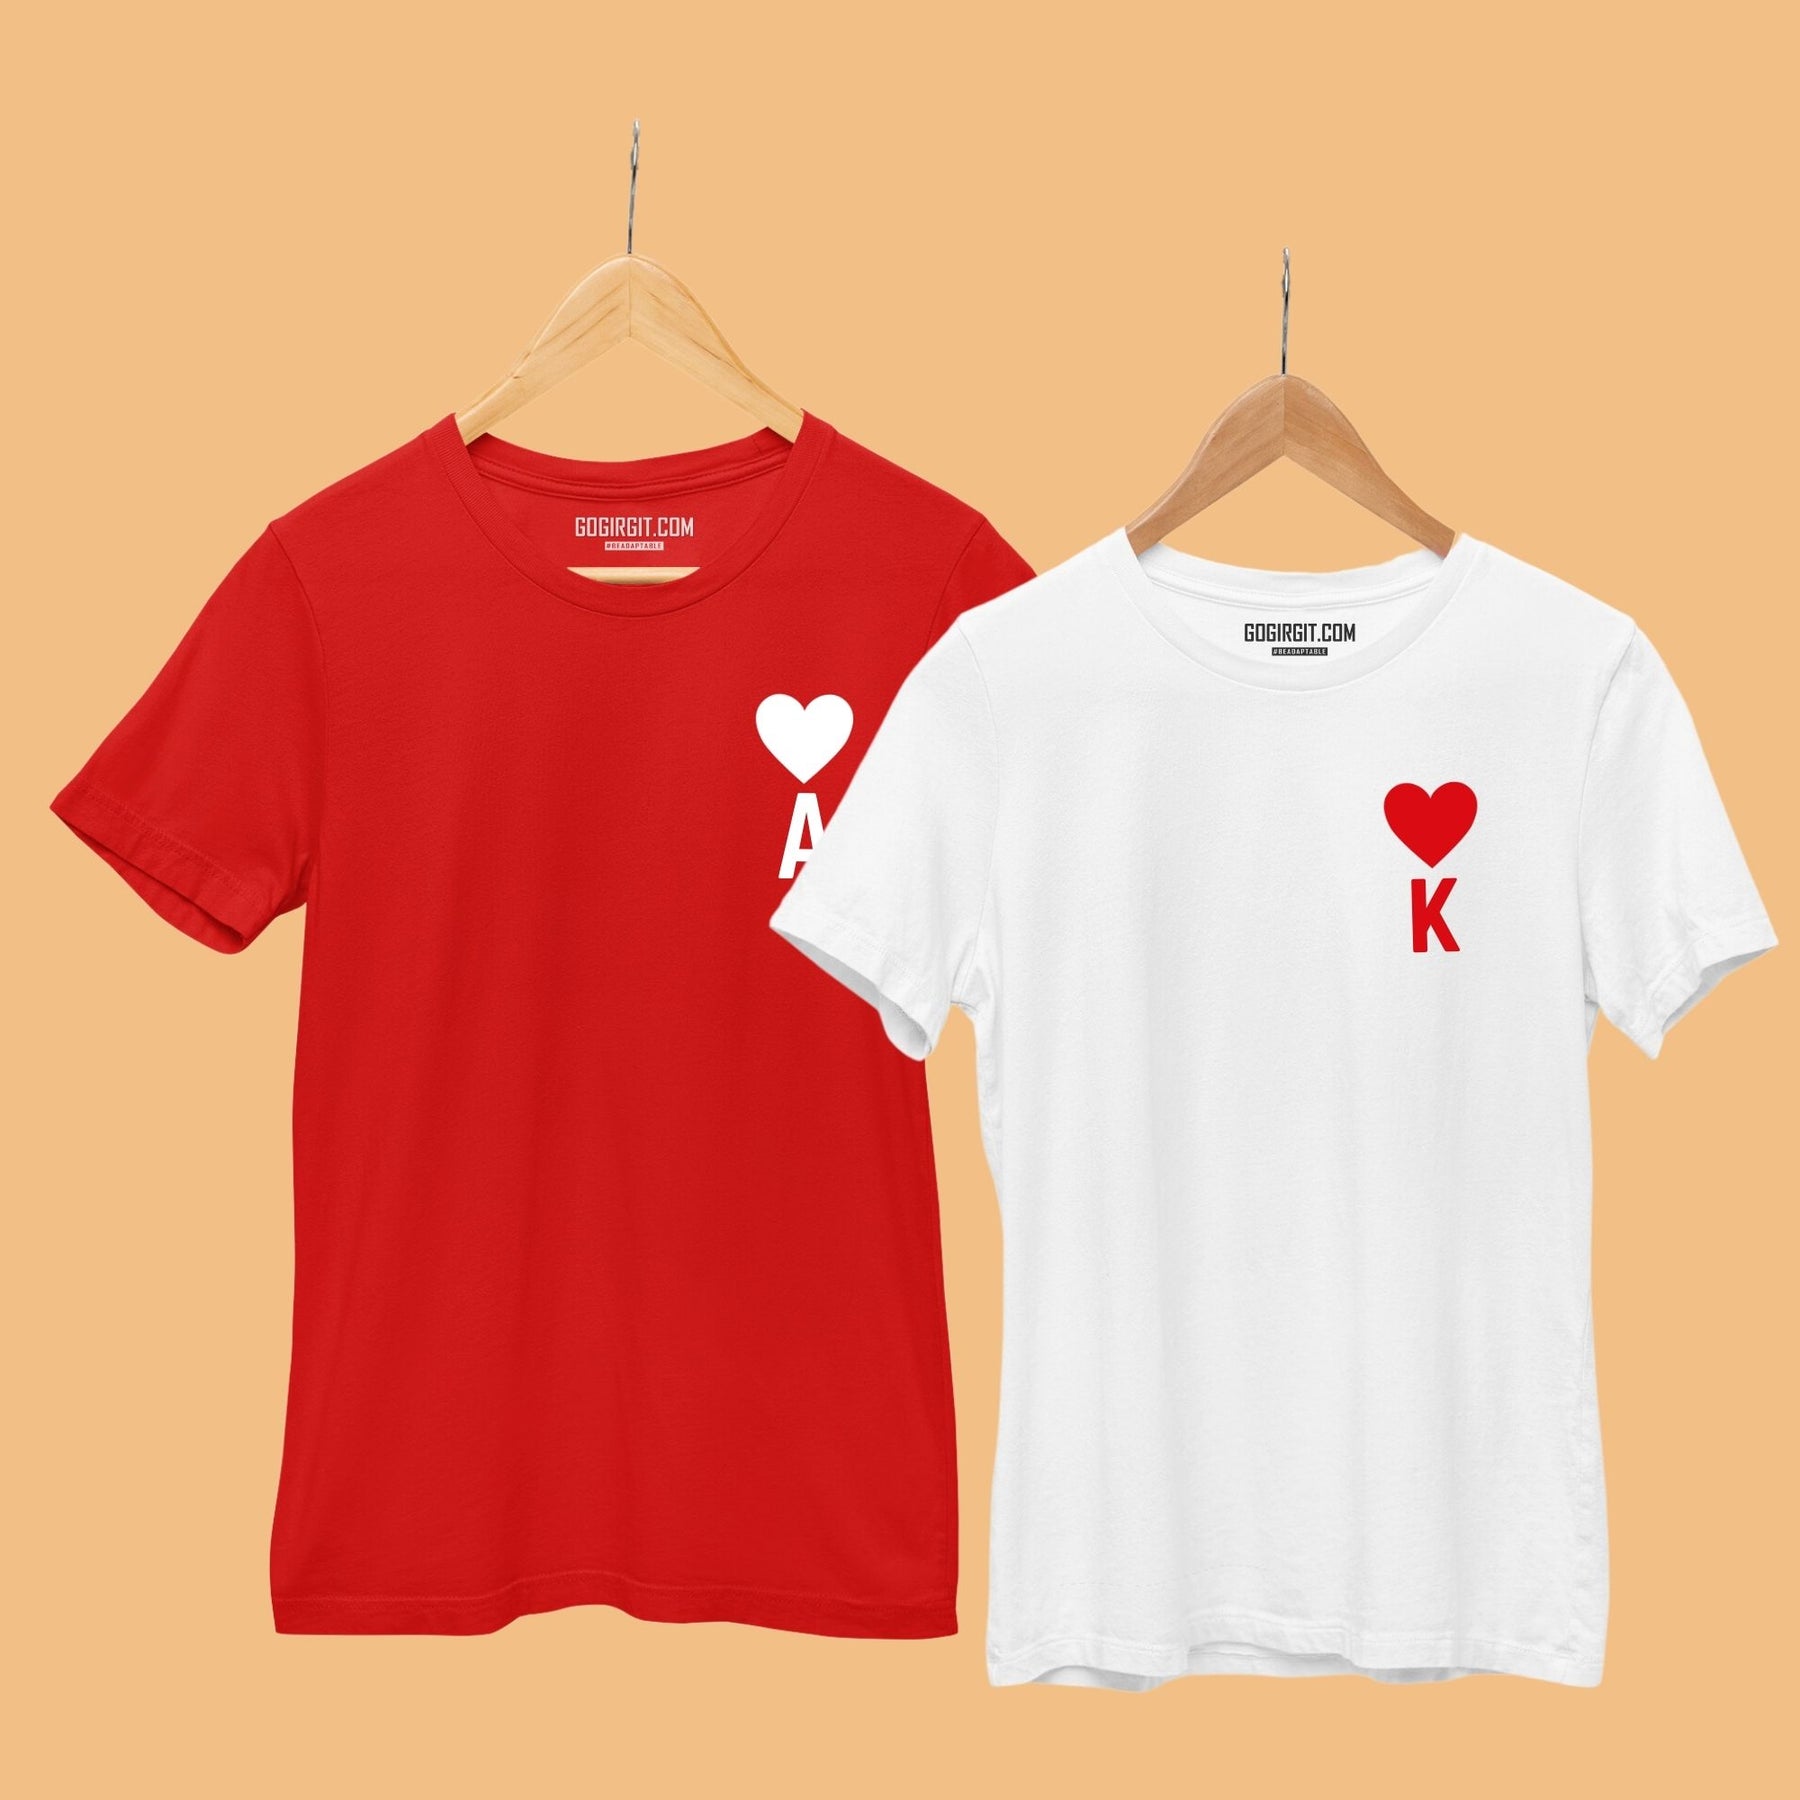 personalized-pocket-initials-white-and-red-cotton-couple-tshirts-gogirgit-com-hanging